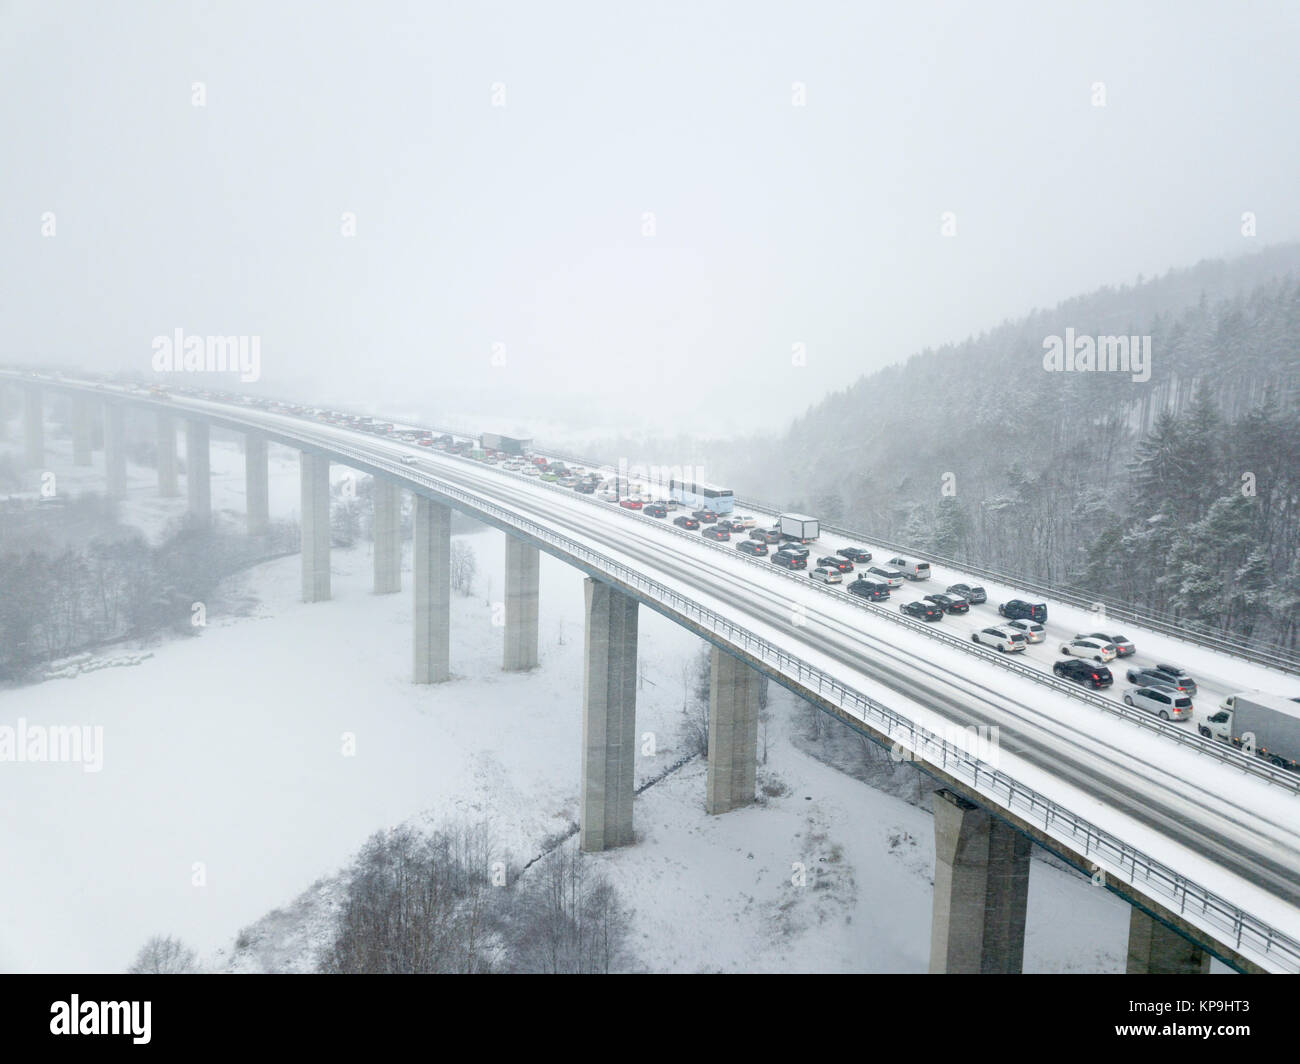 Aerial view over a highway bridge during a heavy snowfall in winter Stock Photo